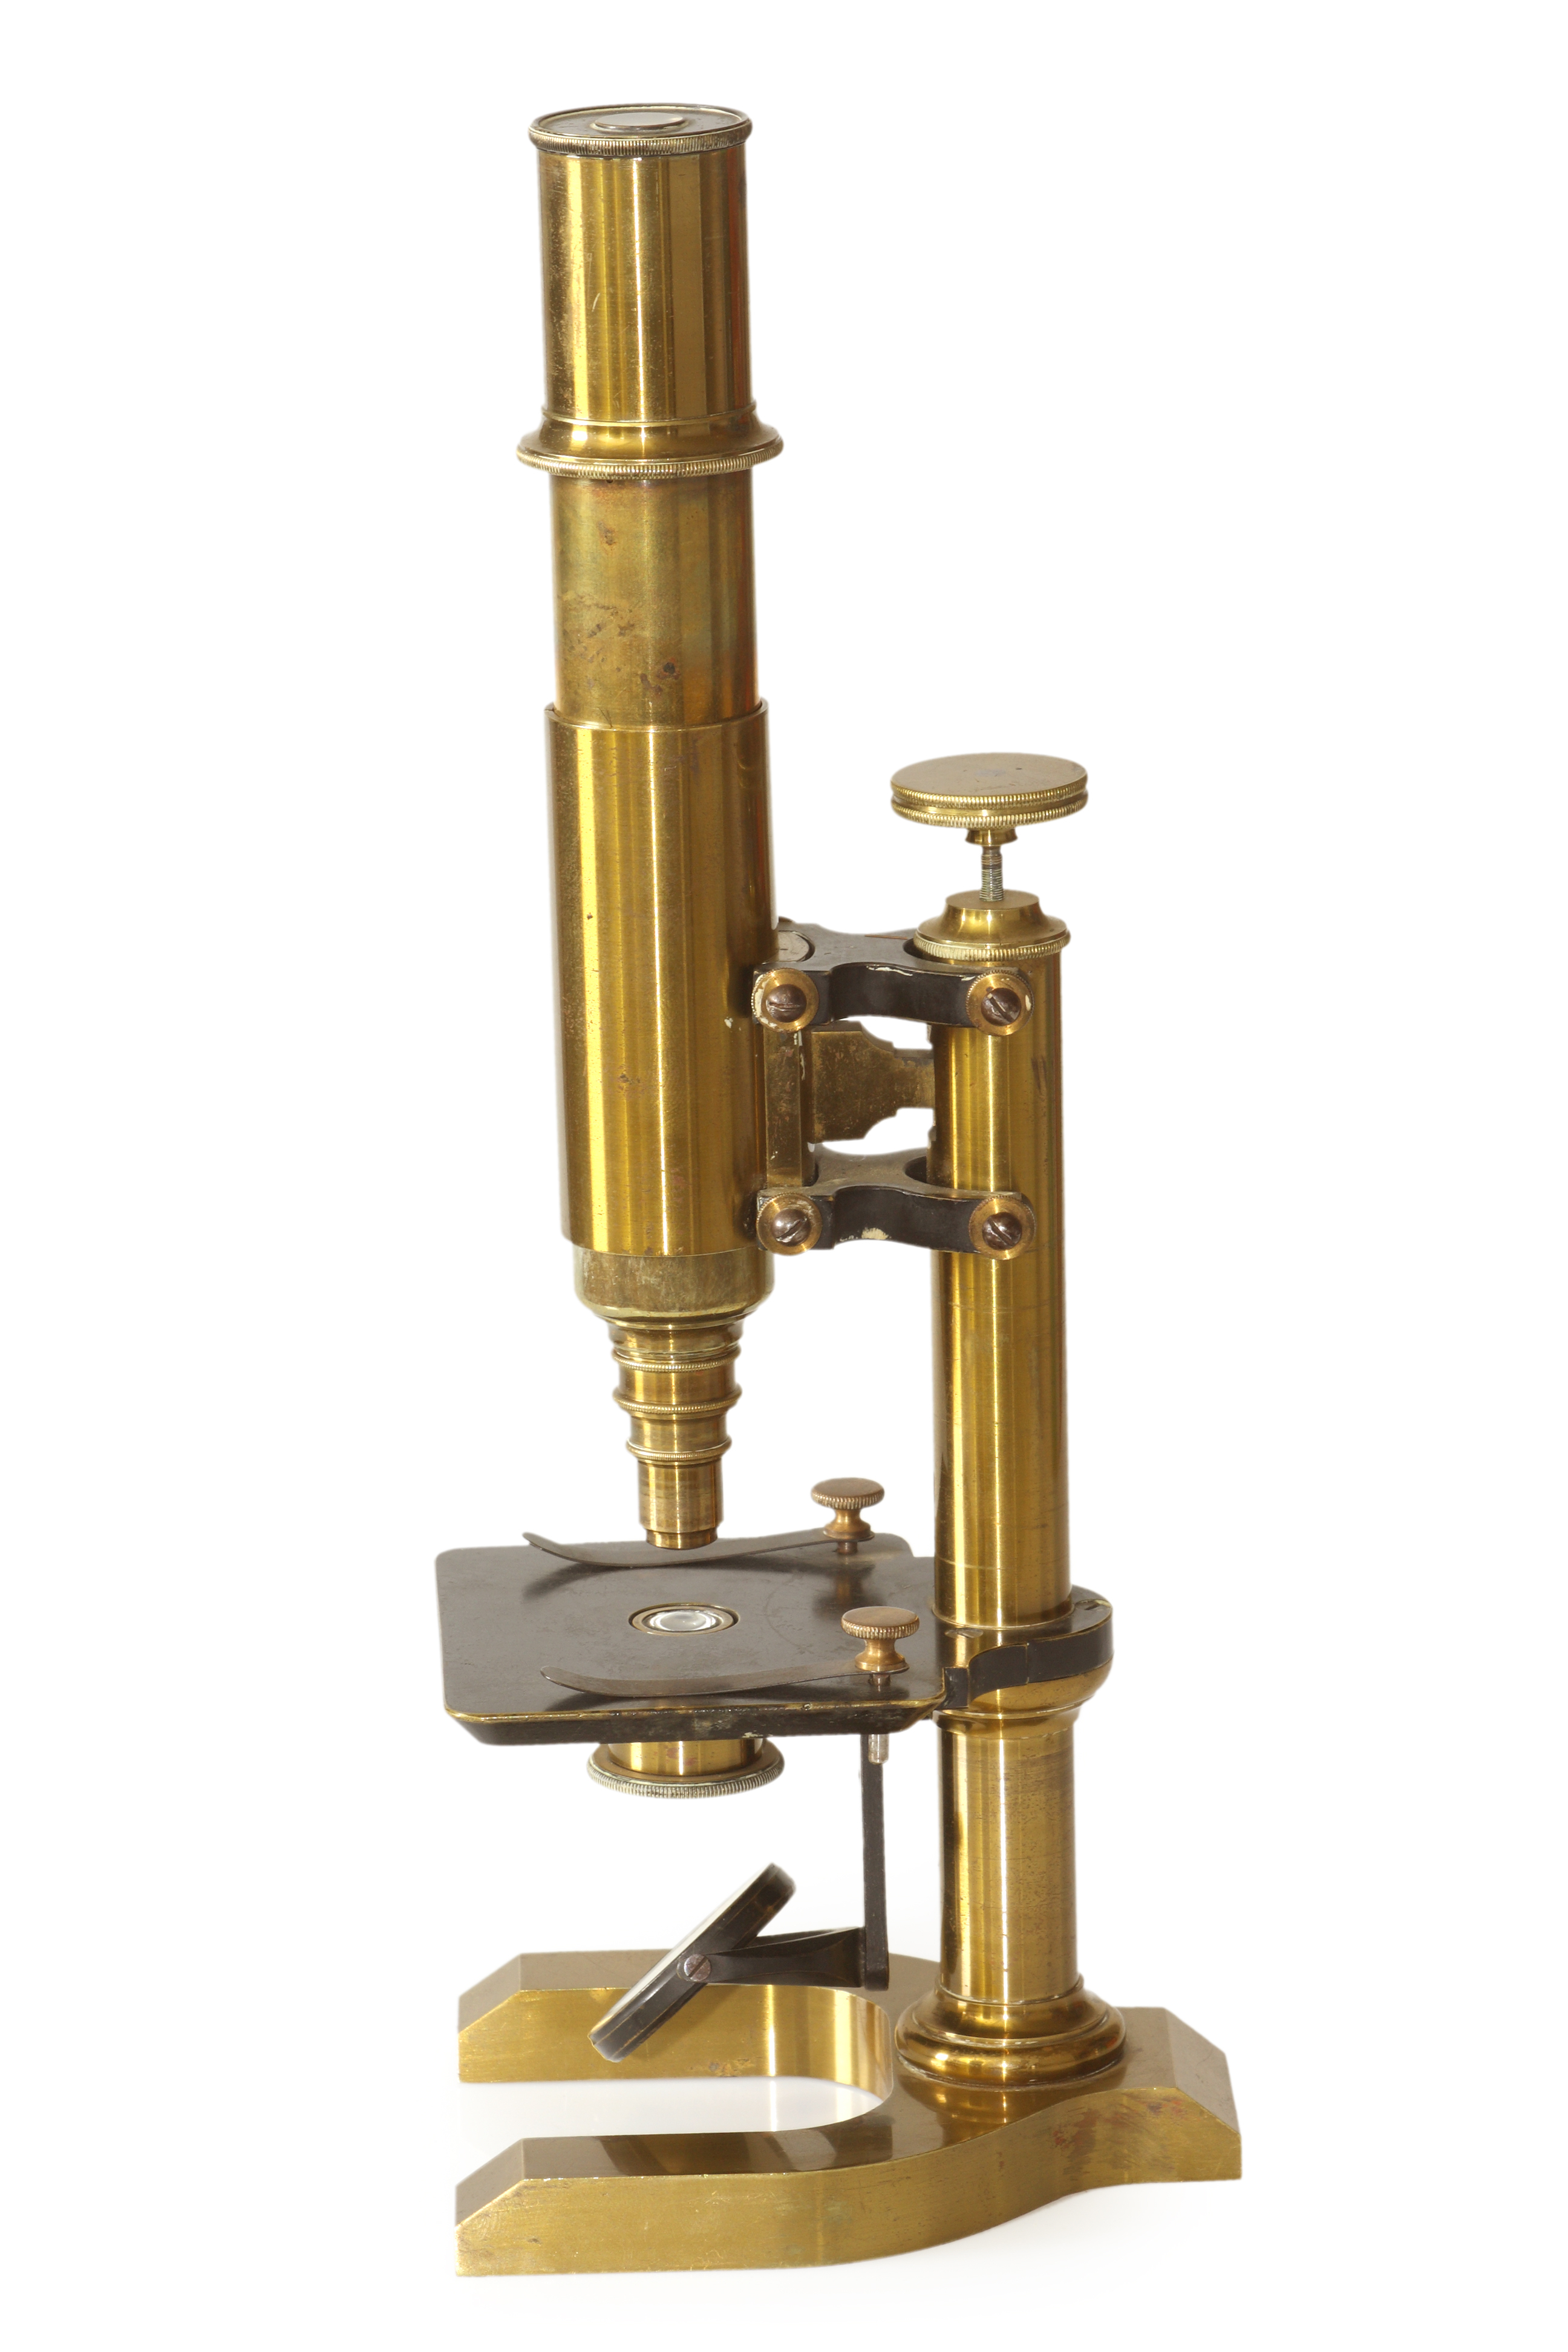 A microscope (1878) | British Society for Immunology